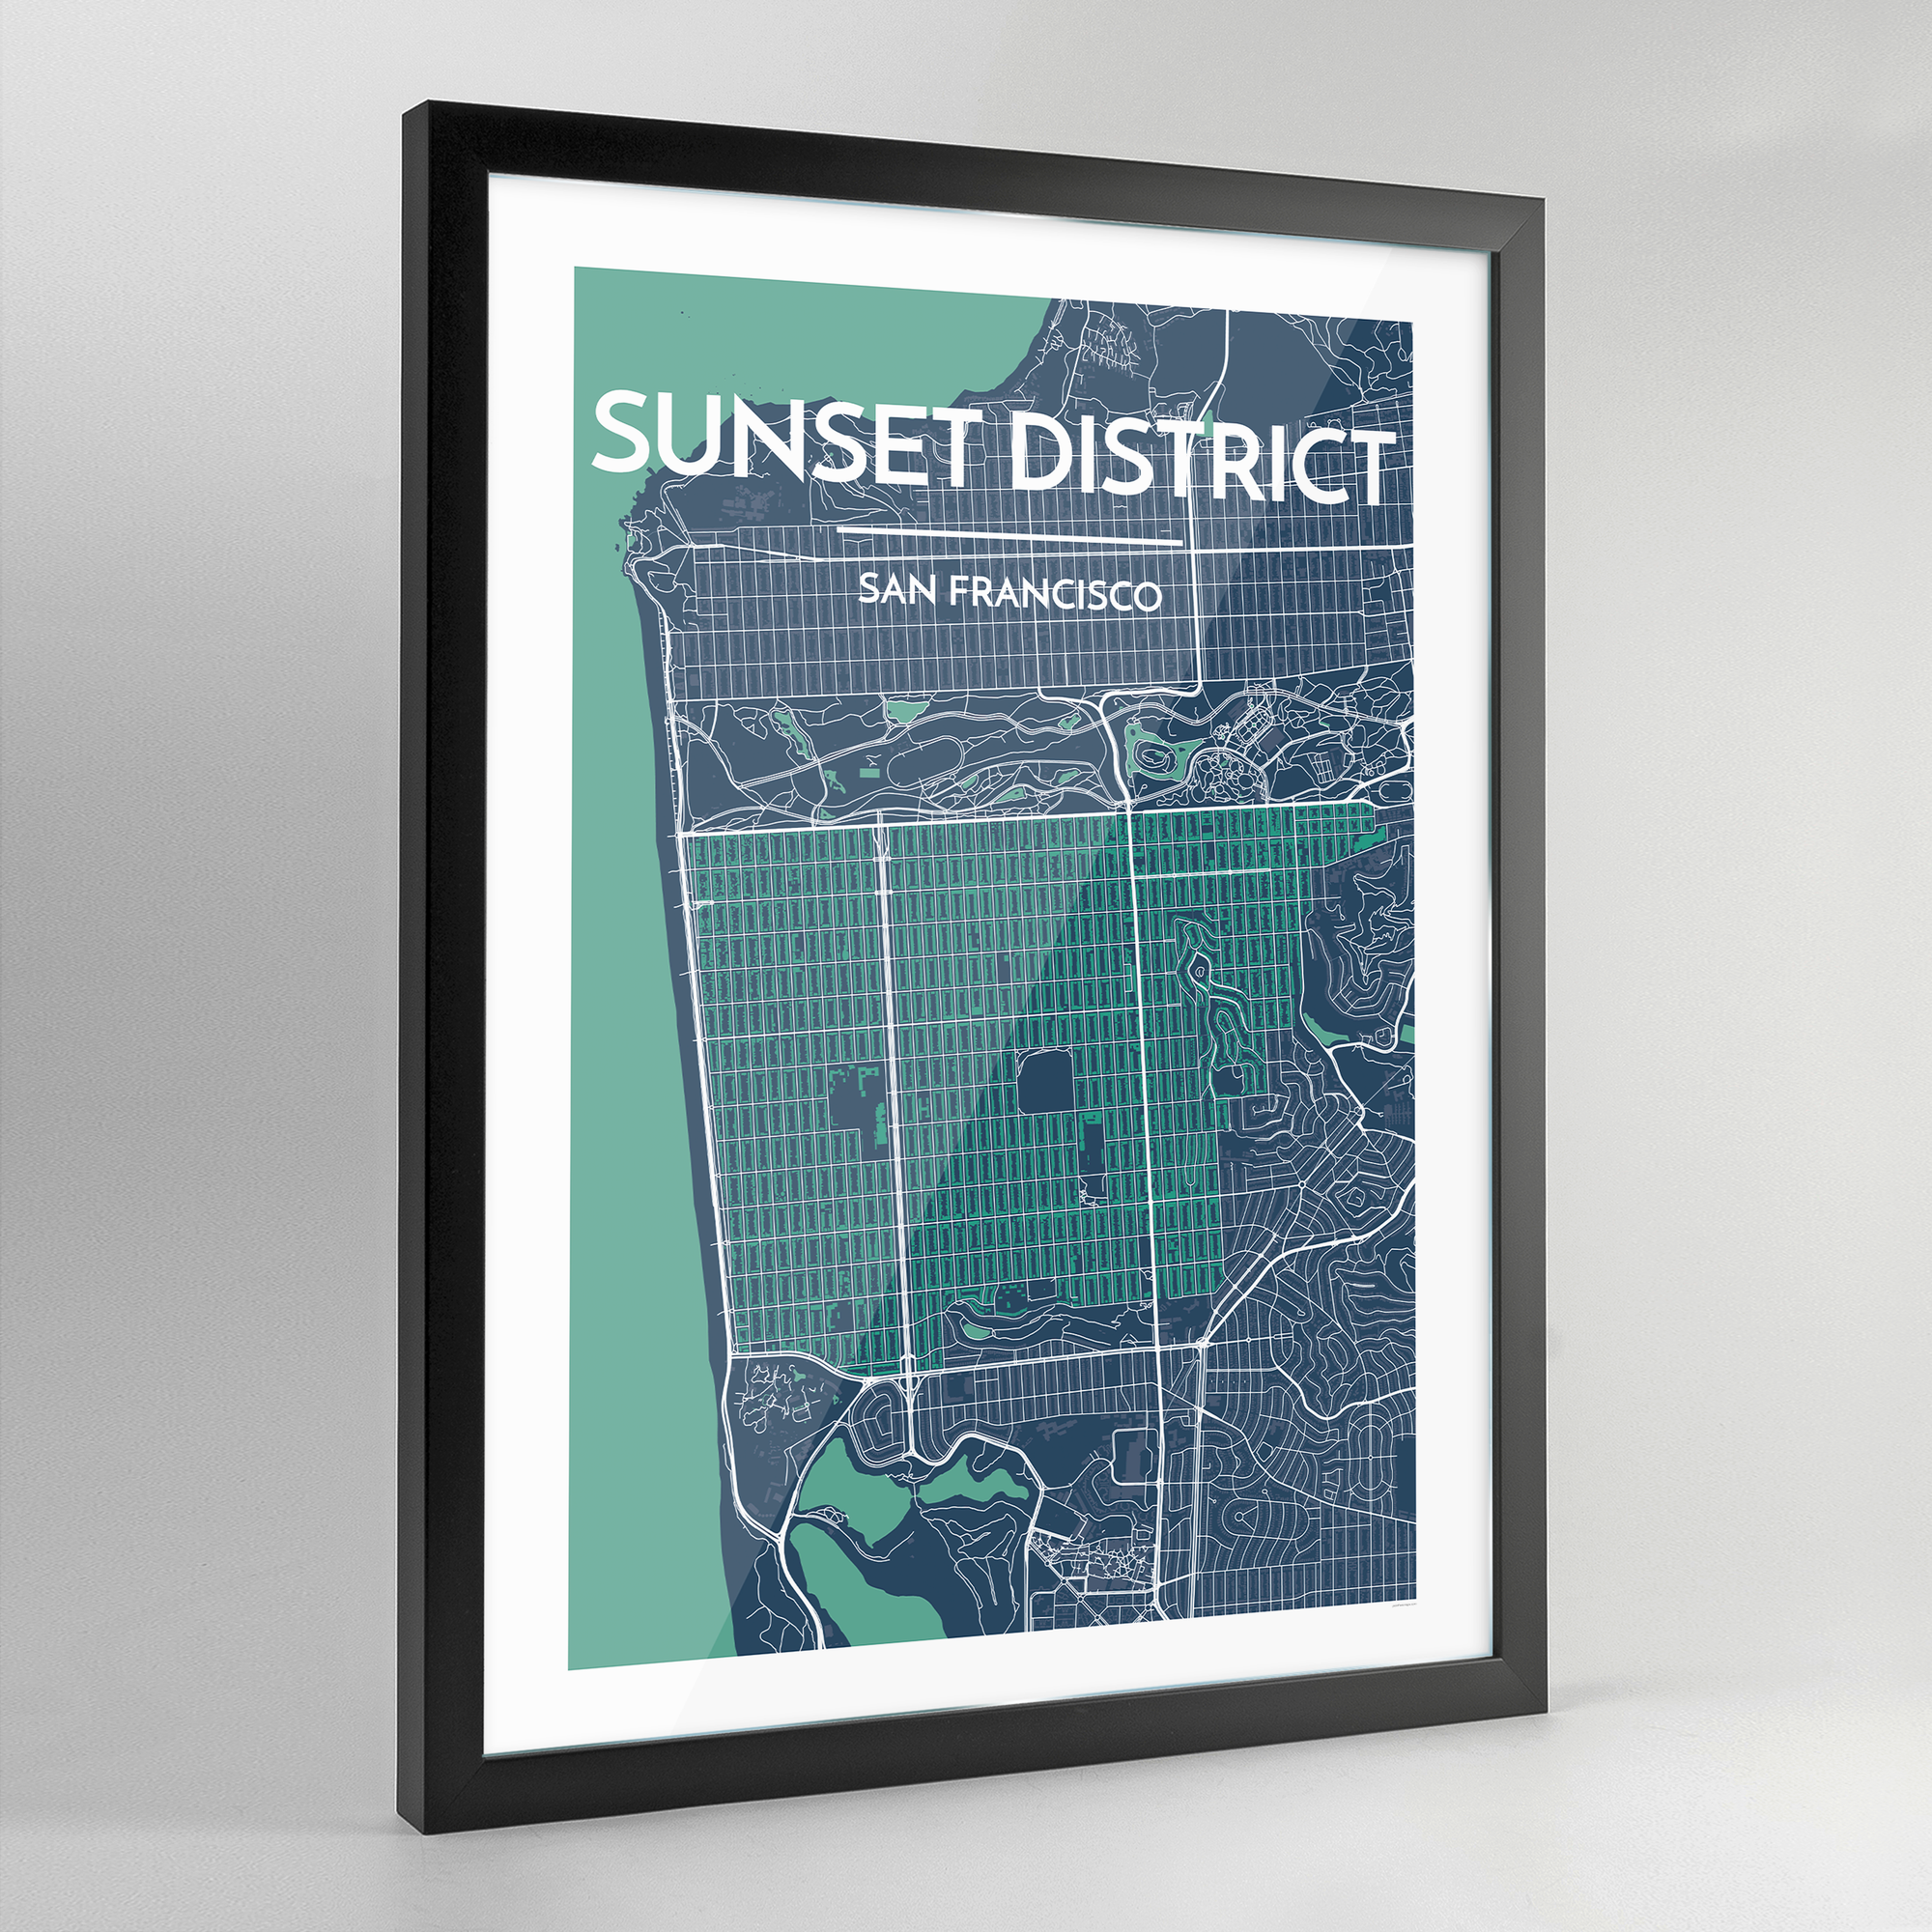 Framed The Sunset District San Francisco City Map Art Print - Point Two Design